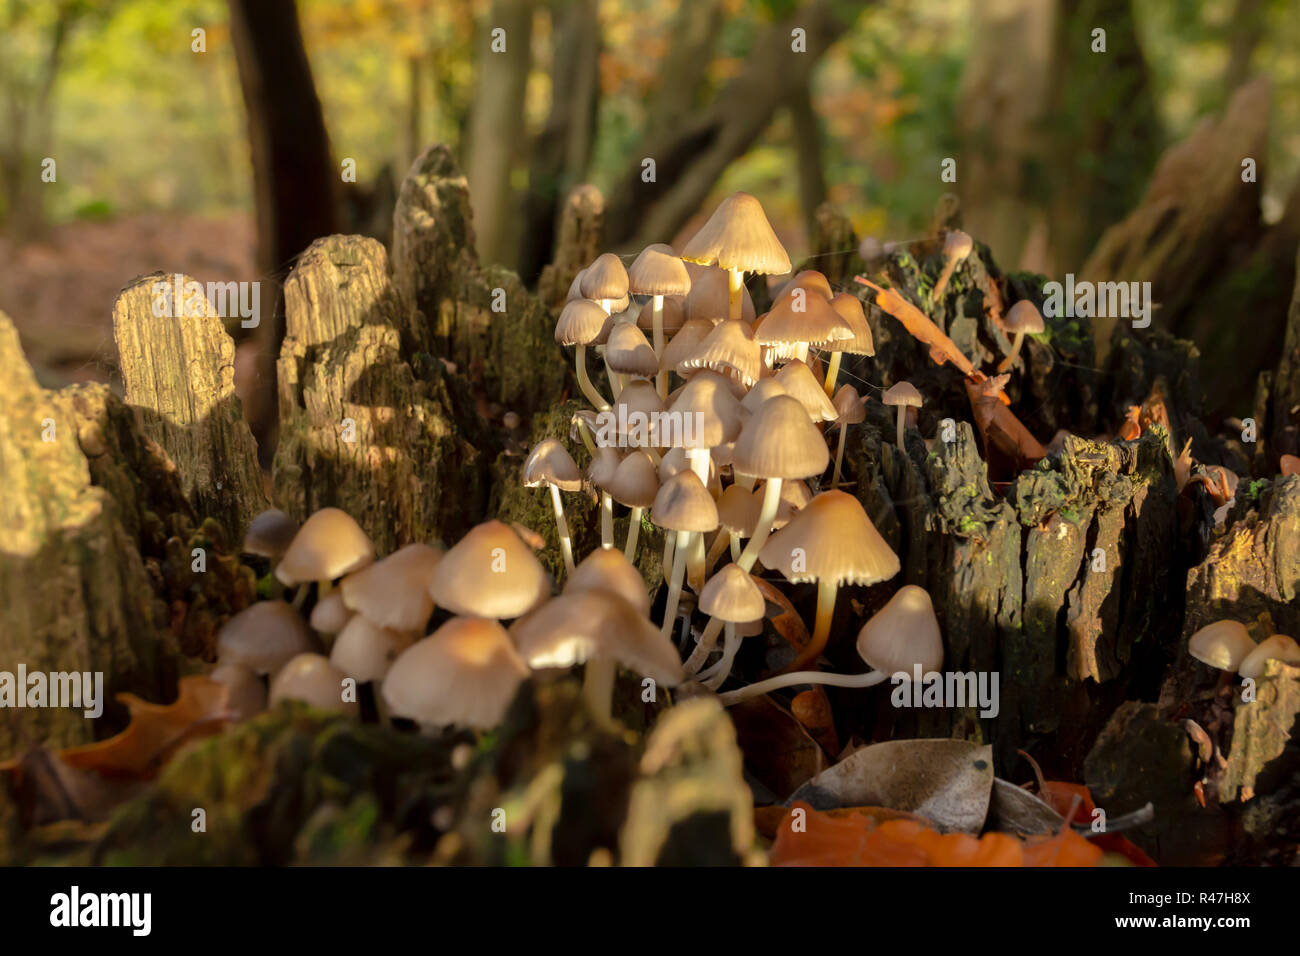 Close-up colour photograph of a clump of Oak-stump mushrooms within old tree stump in landscape orientation. Stock Photo